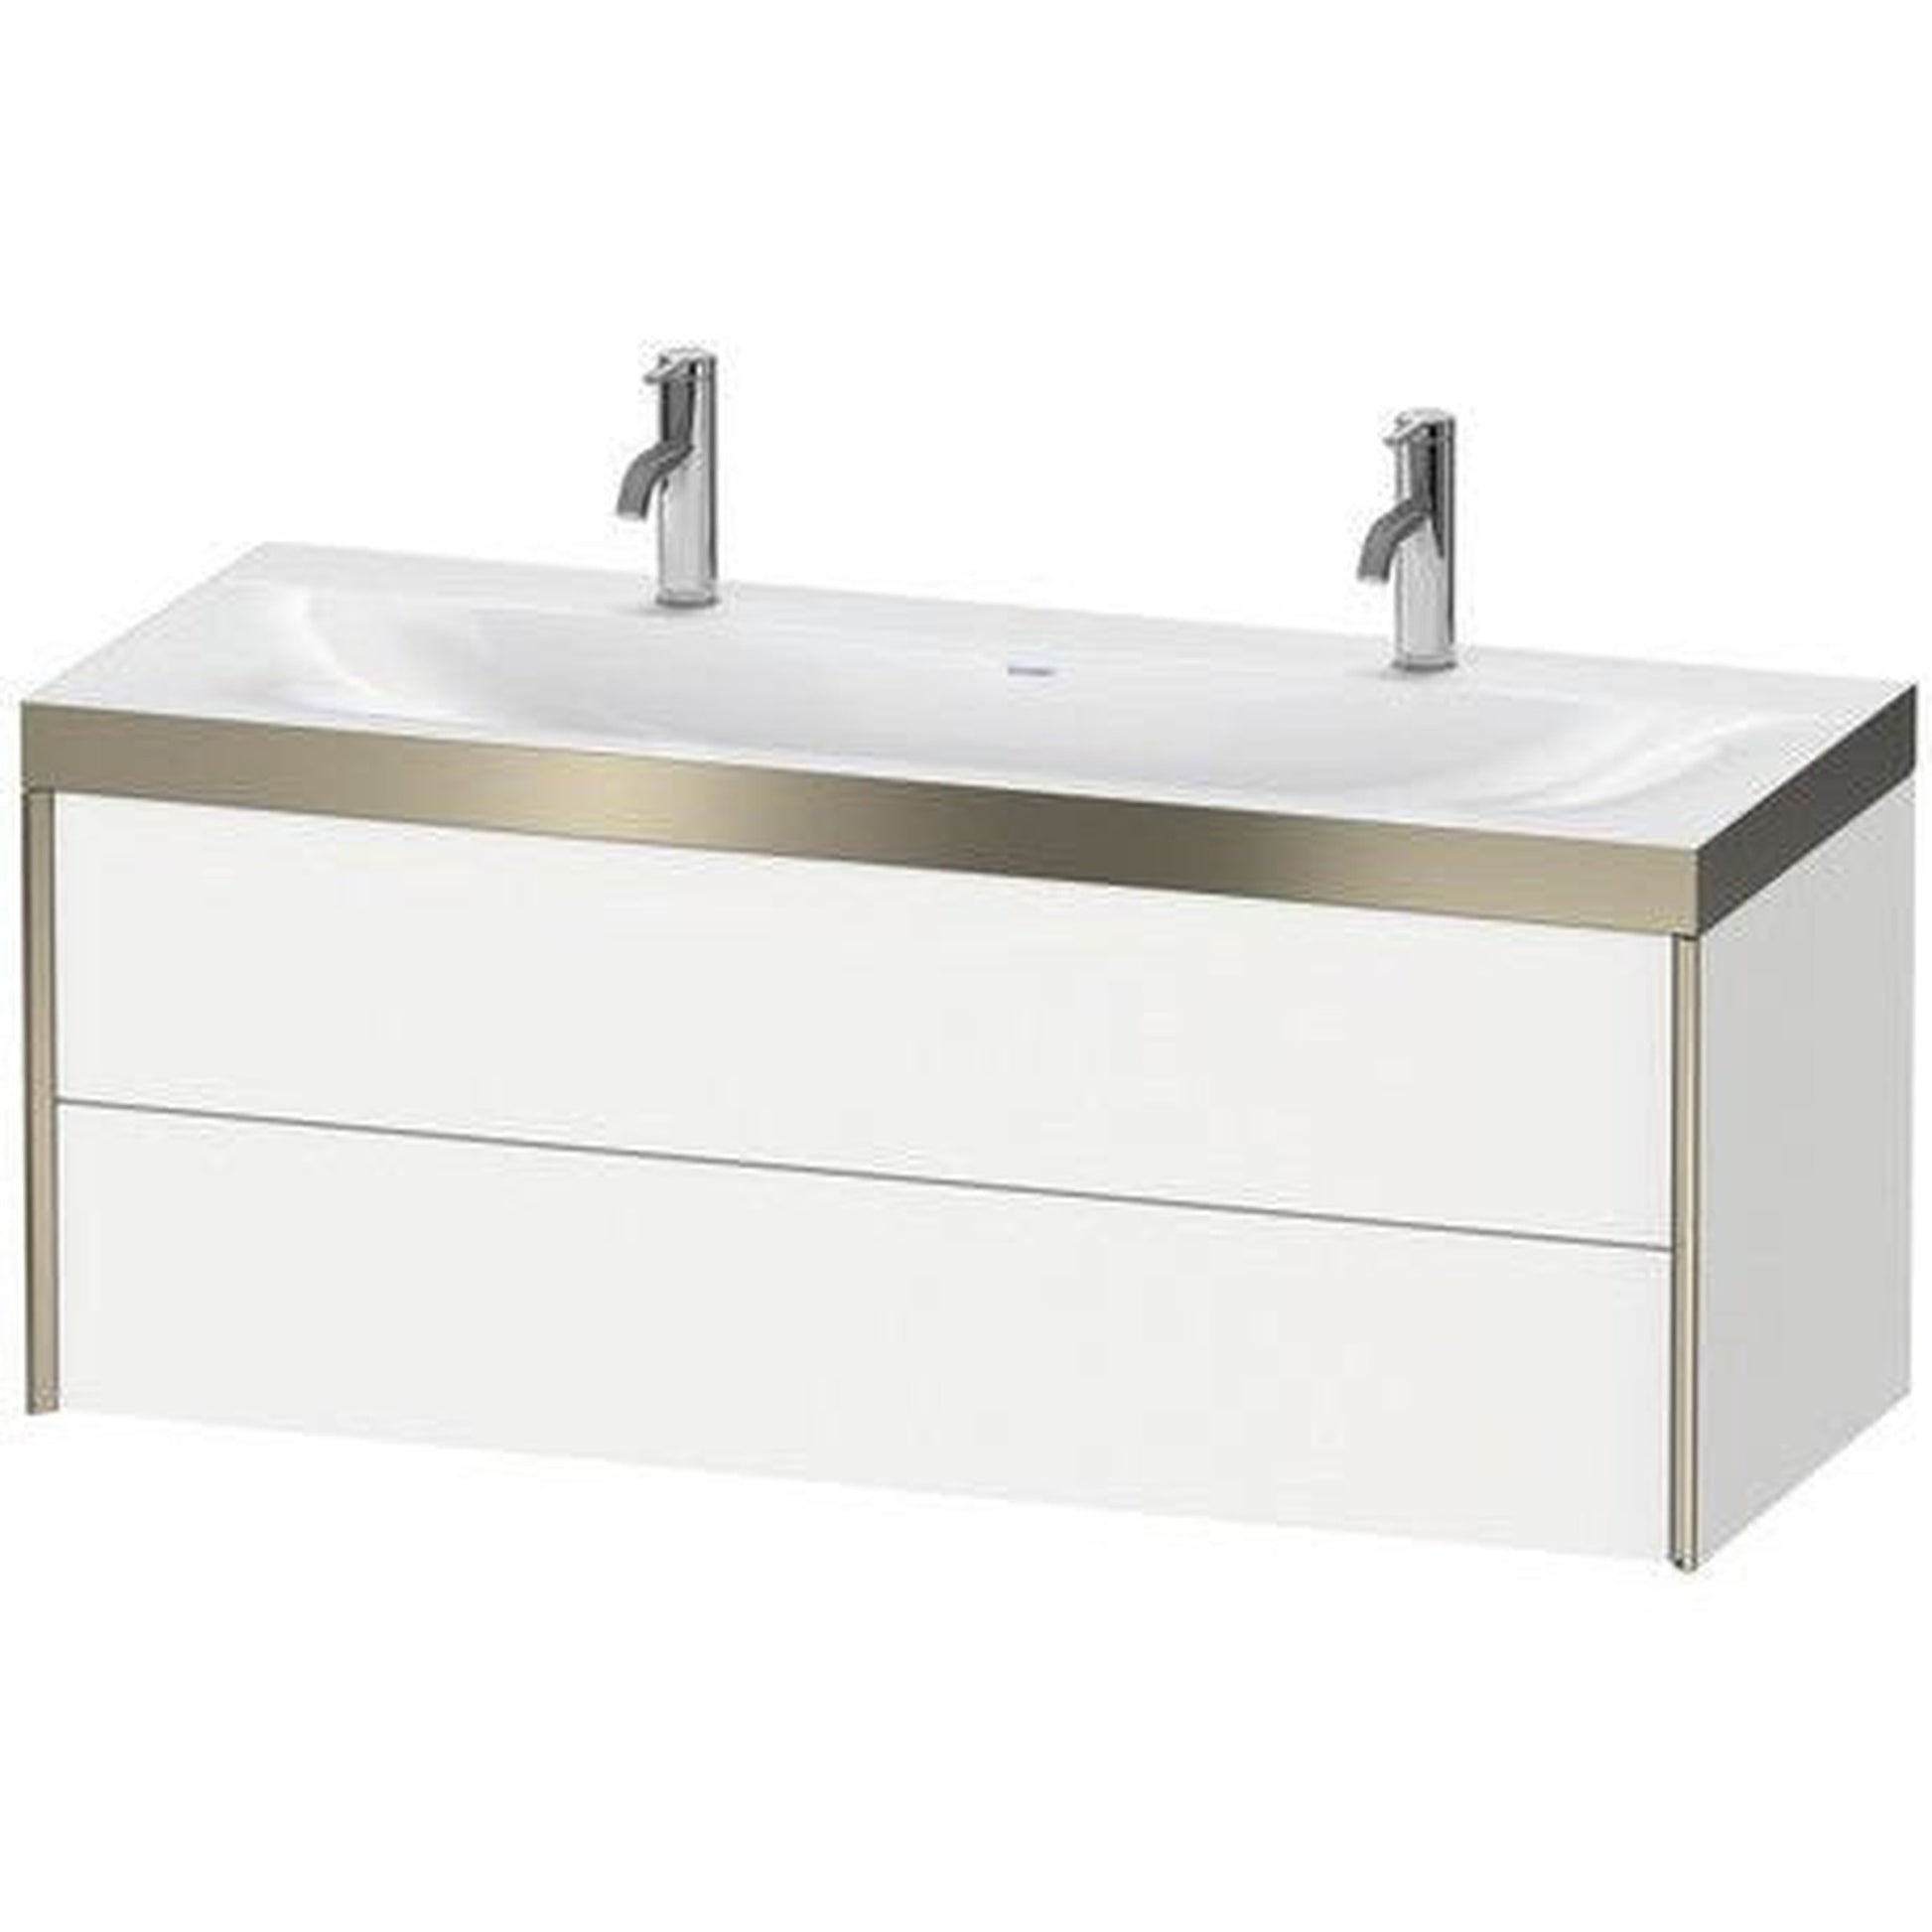 Duravit Xviu 47" x 20" x 19" Two Drawer C-Bonded Wall-Mount Vanity Kit With One Tap Hole, Linen (XV4618OB175P)